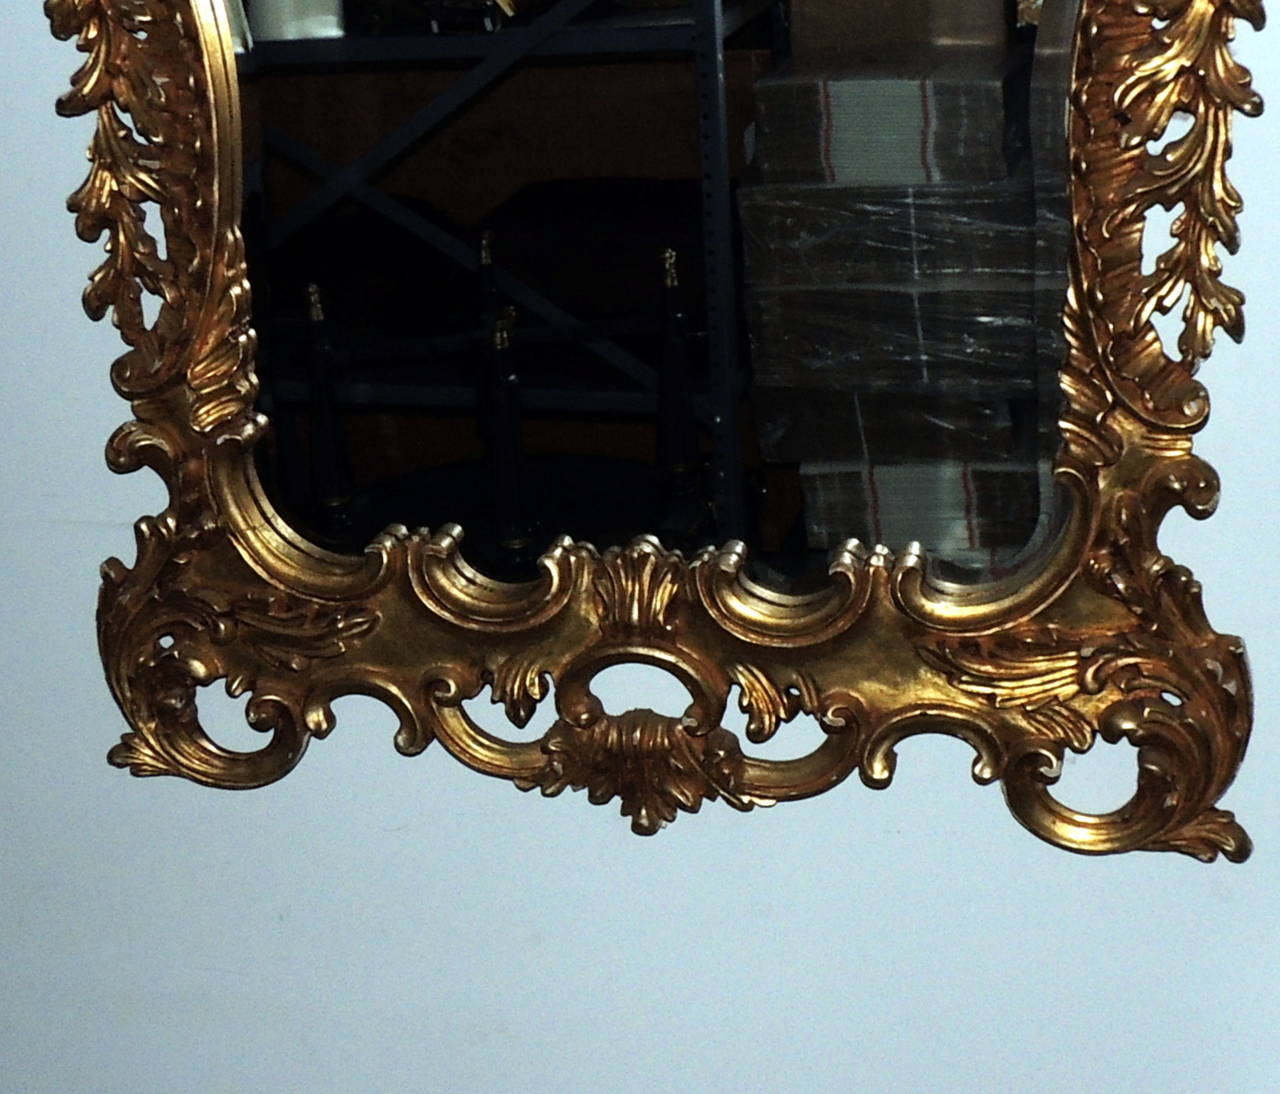 Mid-20th Century Wonderful Pair of Italian Gilt Carved Wood Rococo Mirrors with Beveled Edges